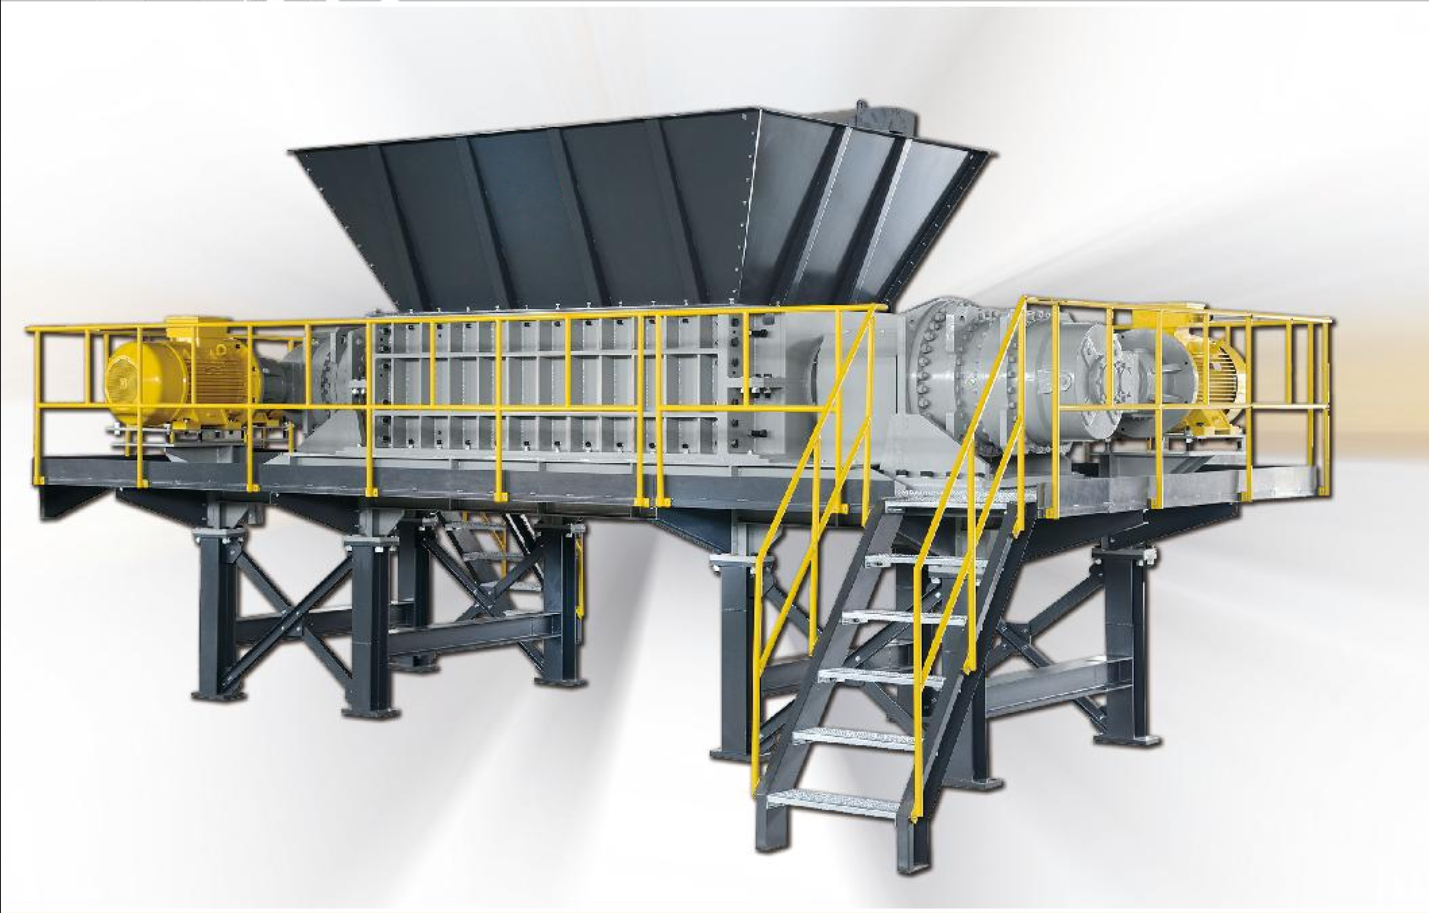 In-depth analysis of the difference between a single shaft shredder and a double shaft shredder